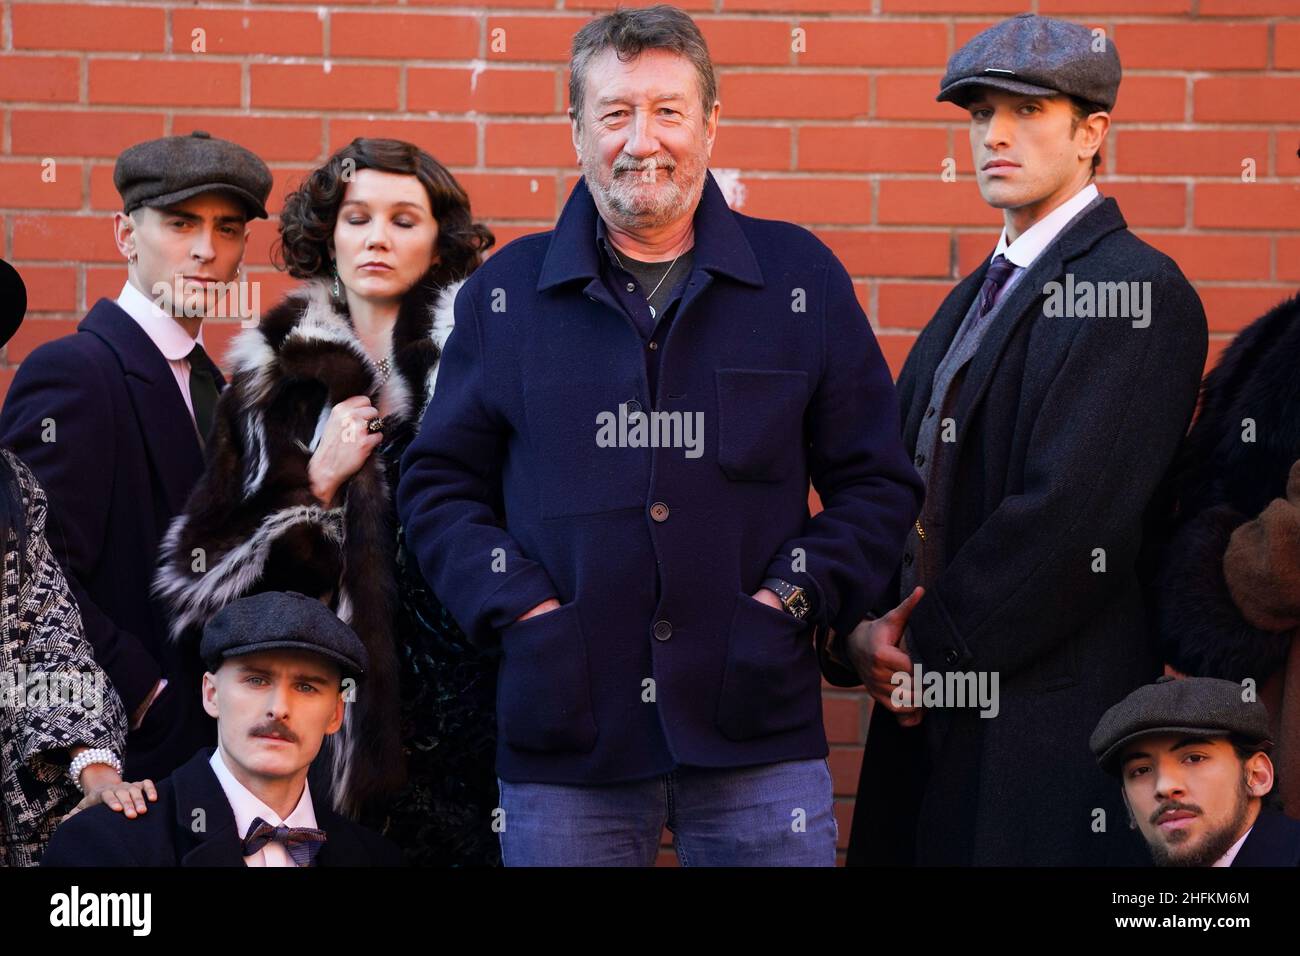 Peaky Blinders creator Steven Knight poses for photographs alongside members of the cast, during the press launch of the Rambert Dance production of Peaky Blinders: The Redemption of Thomas Shelby at the Dance Hub Birmingham. Picture date: Monday January 17, 2022. Stock Photo